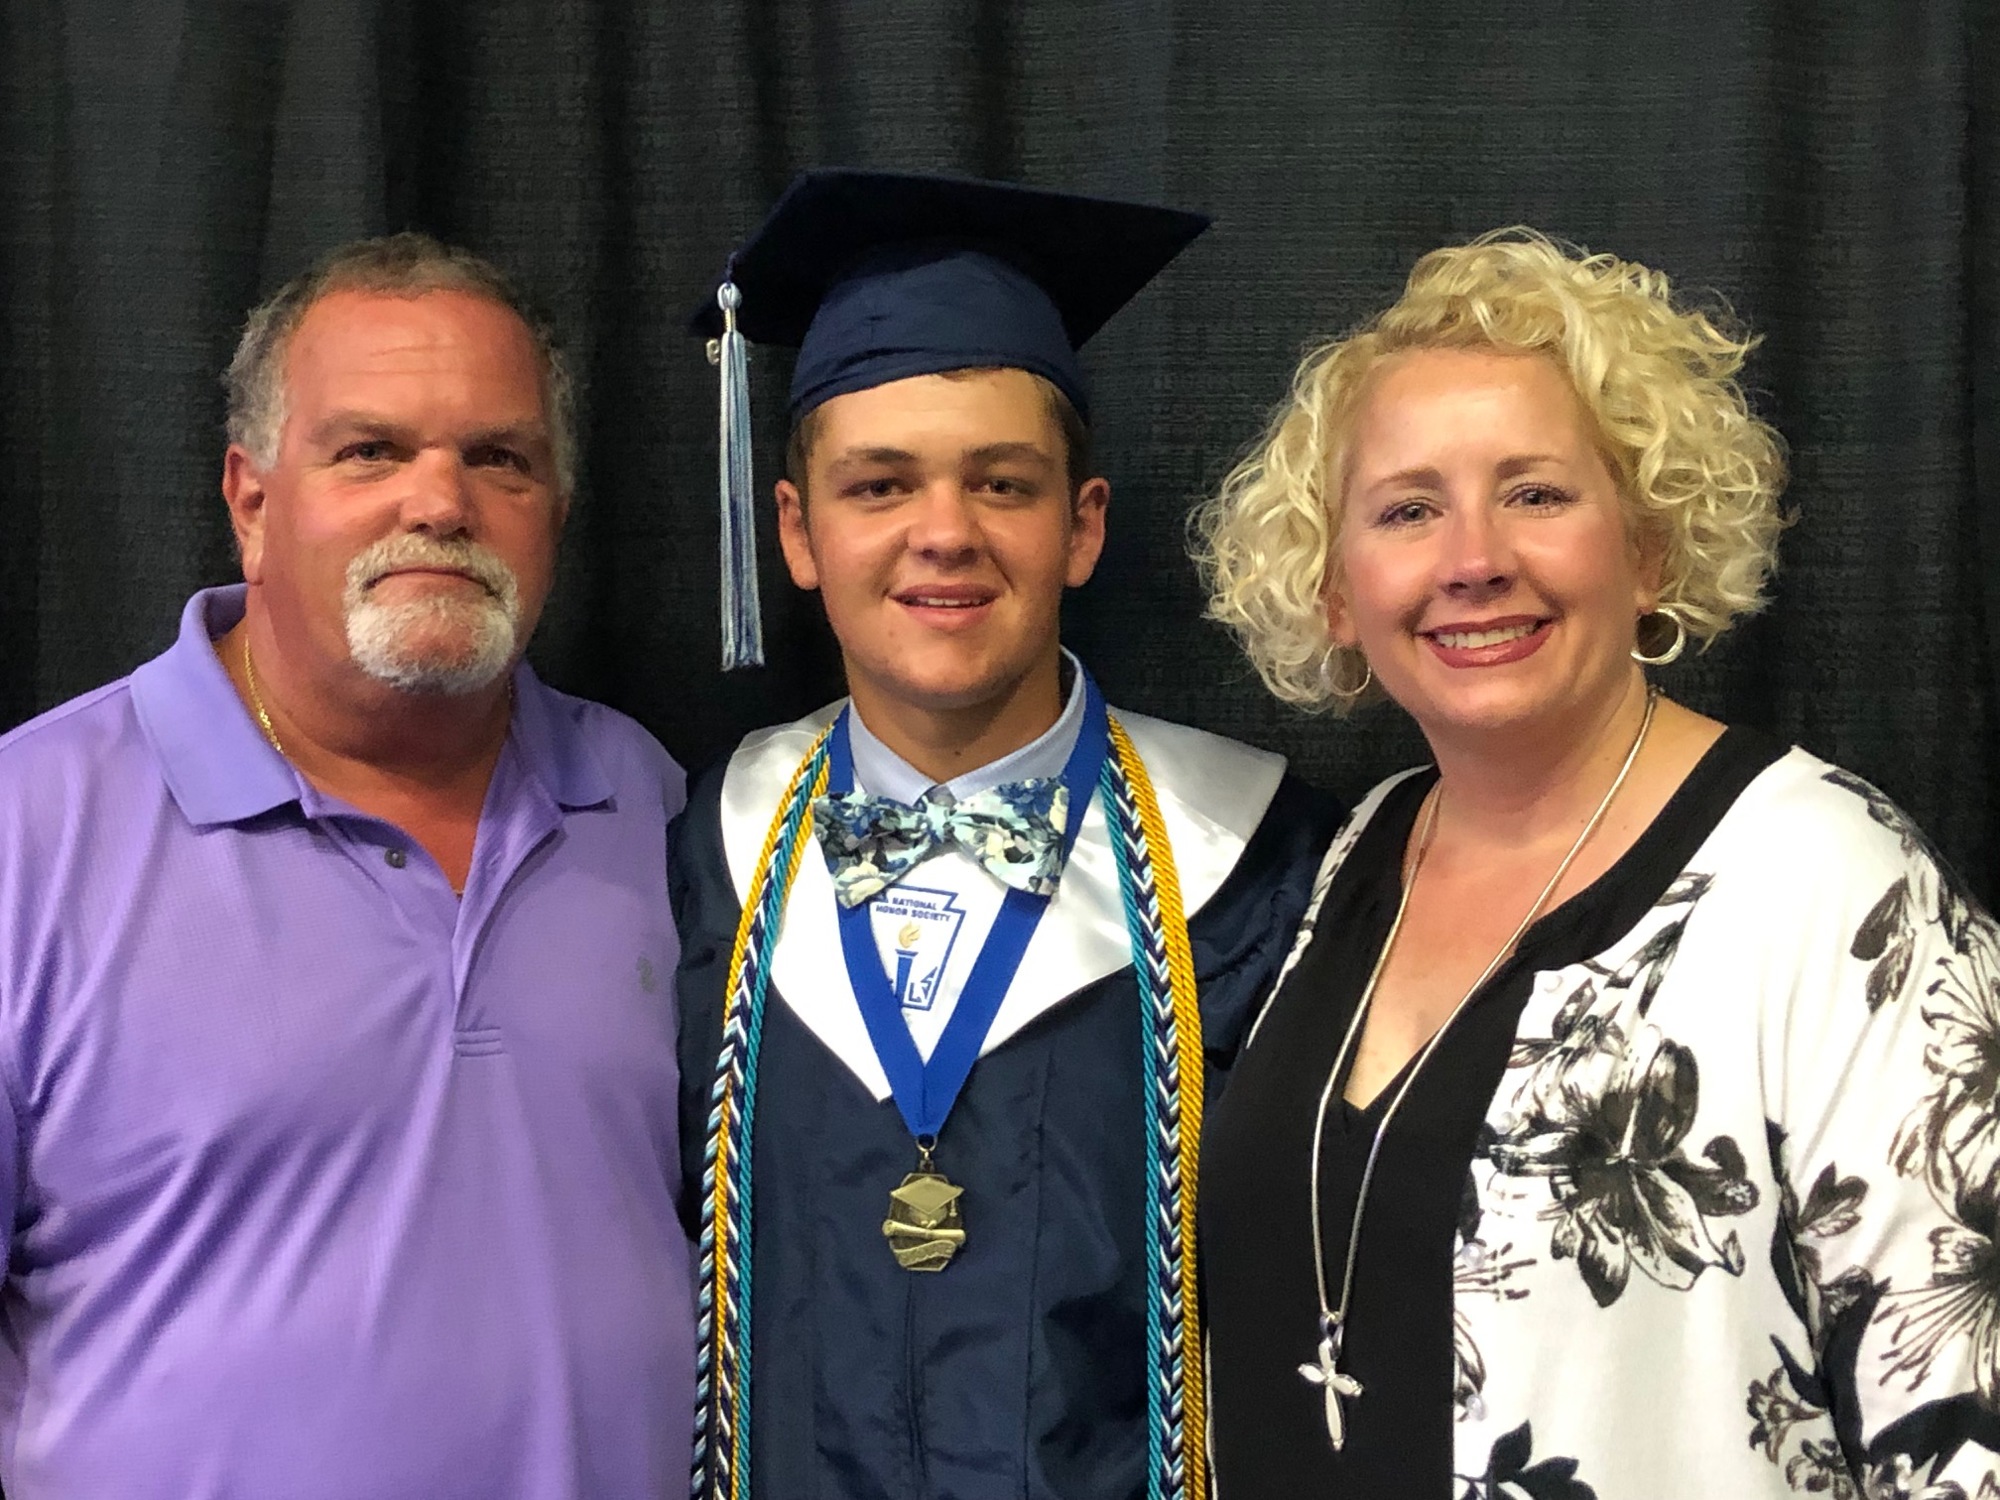 Rick and Tina Desin celebrated high school graduation with their son, Riley.